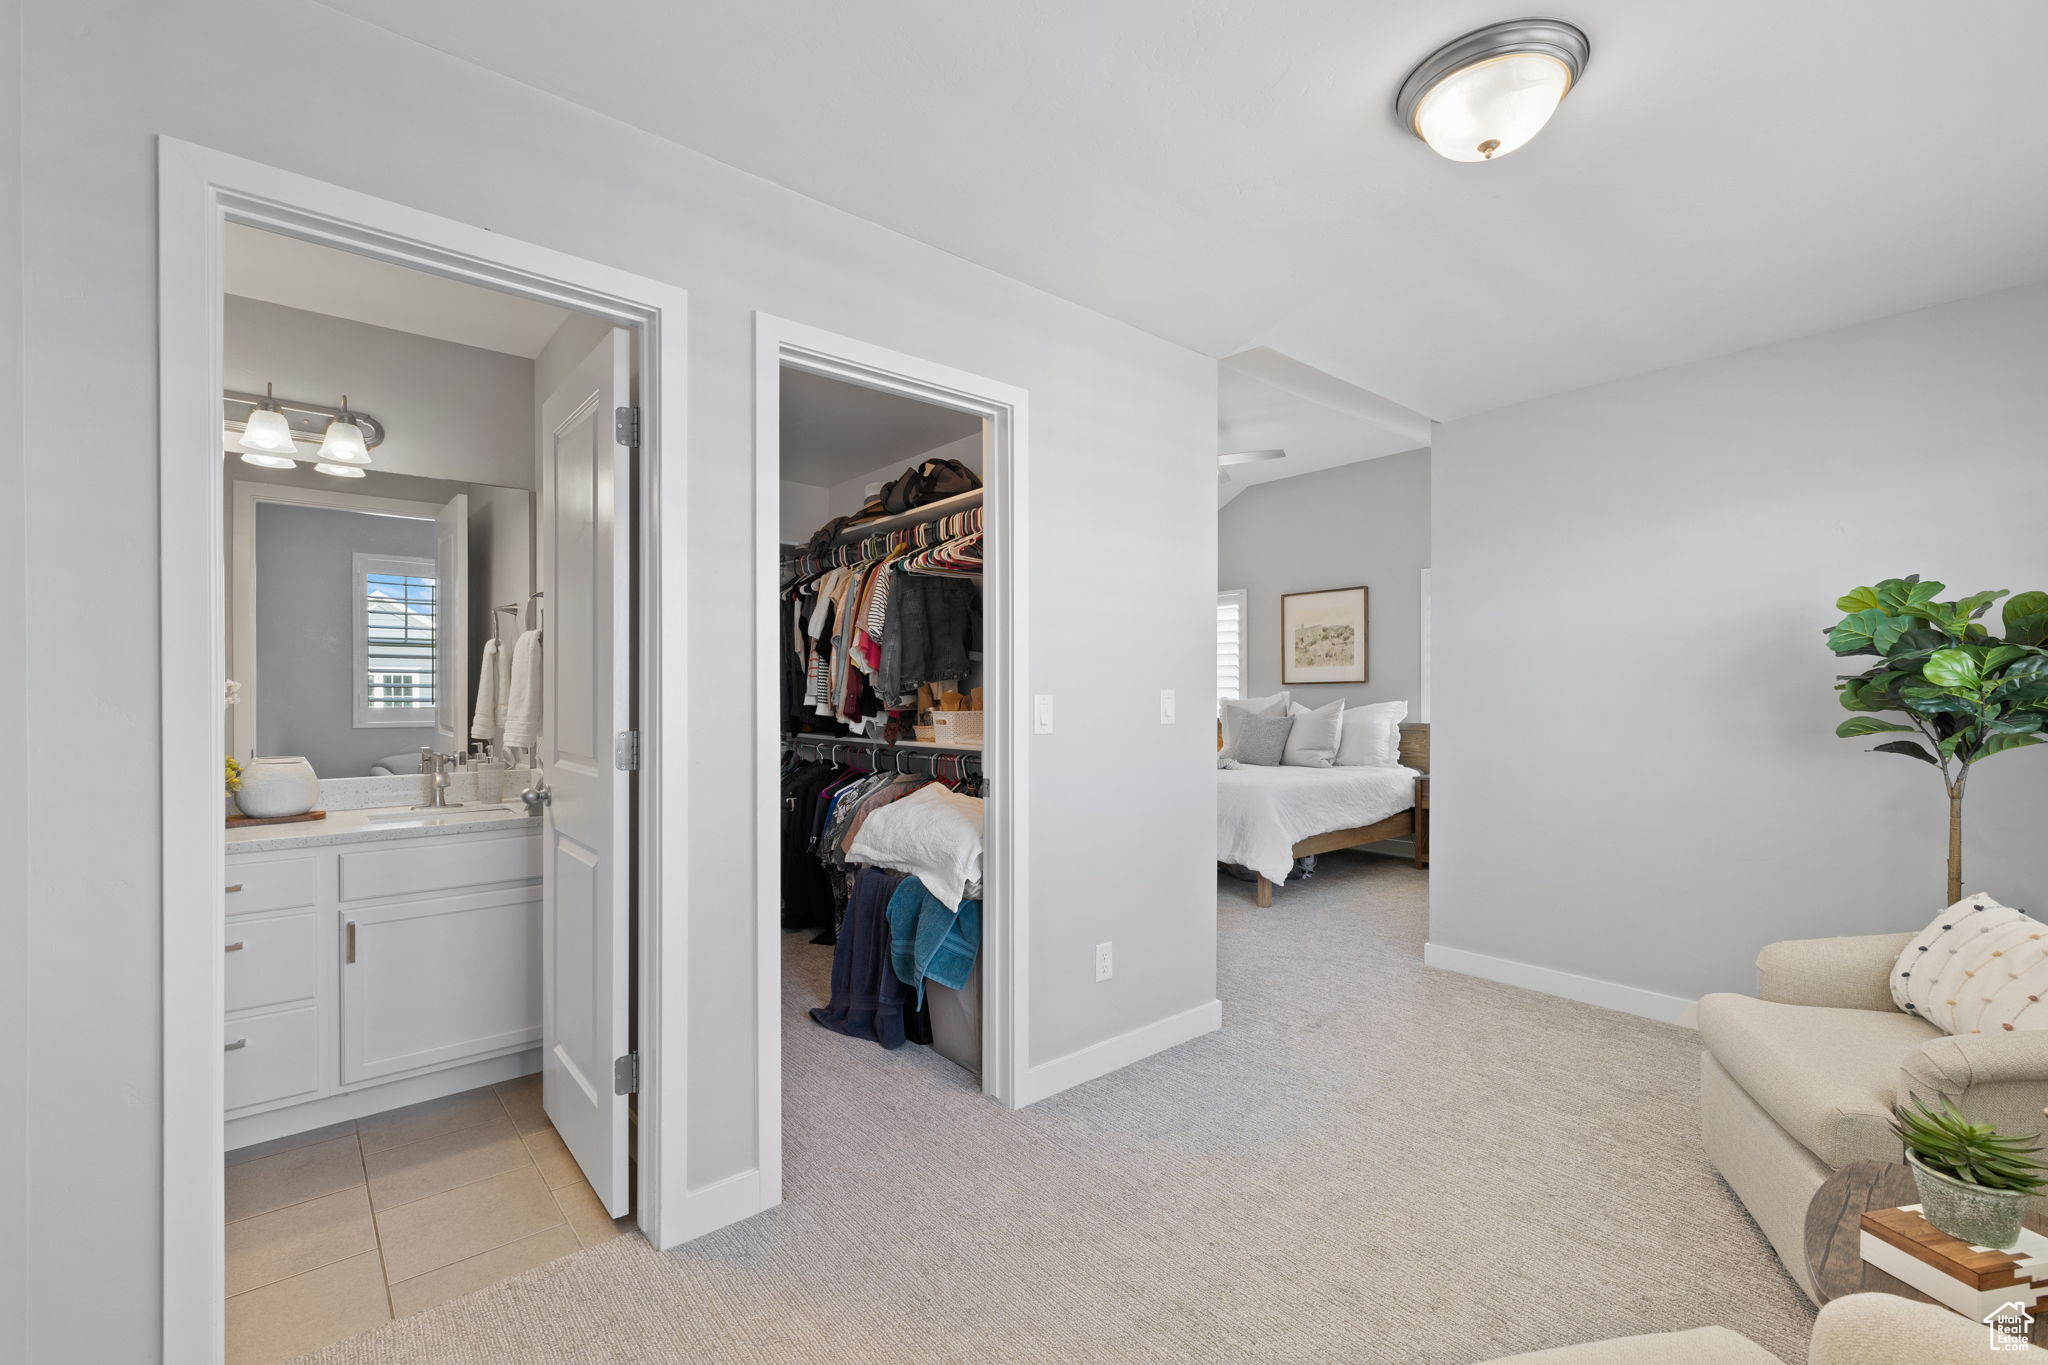 Carpeted bedroom with a closet, a walk in closet, and ensuite bathroom